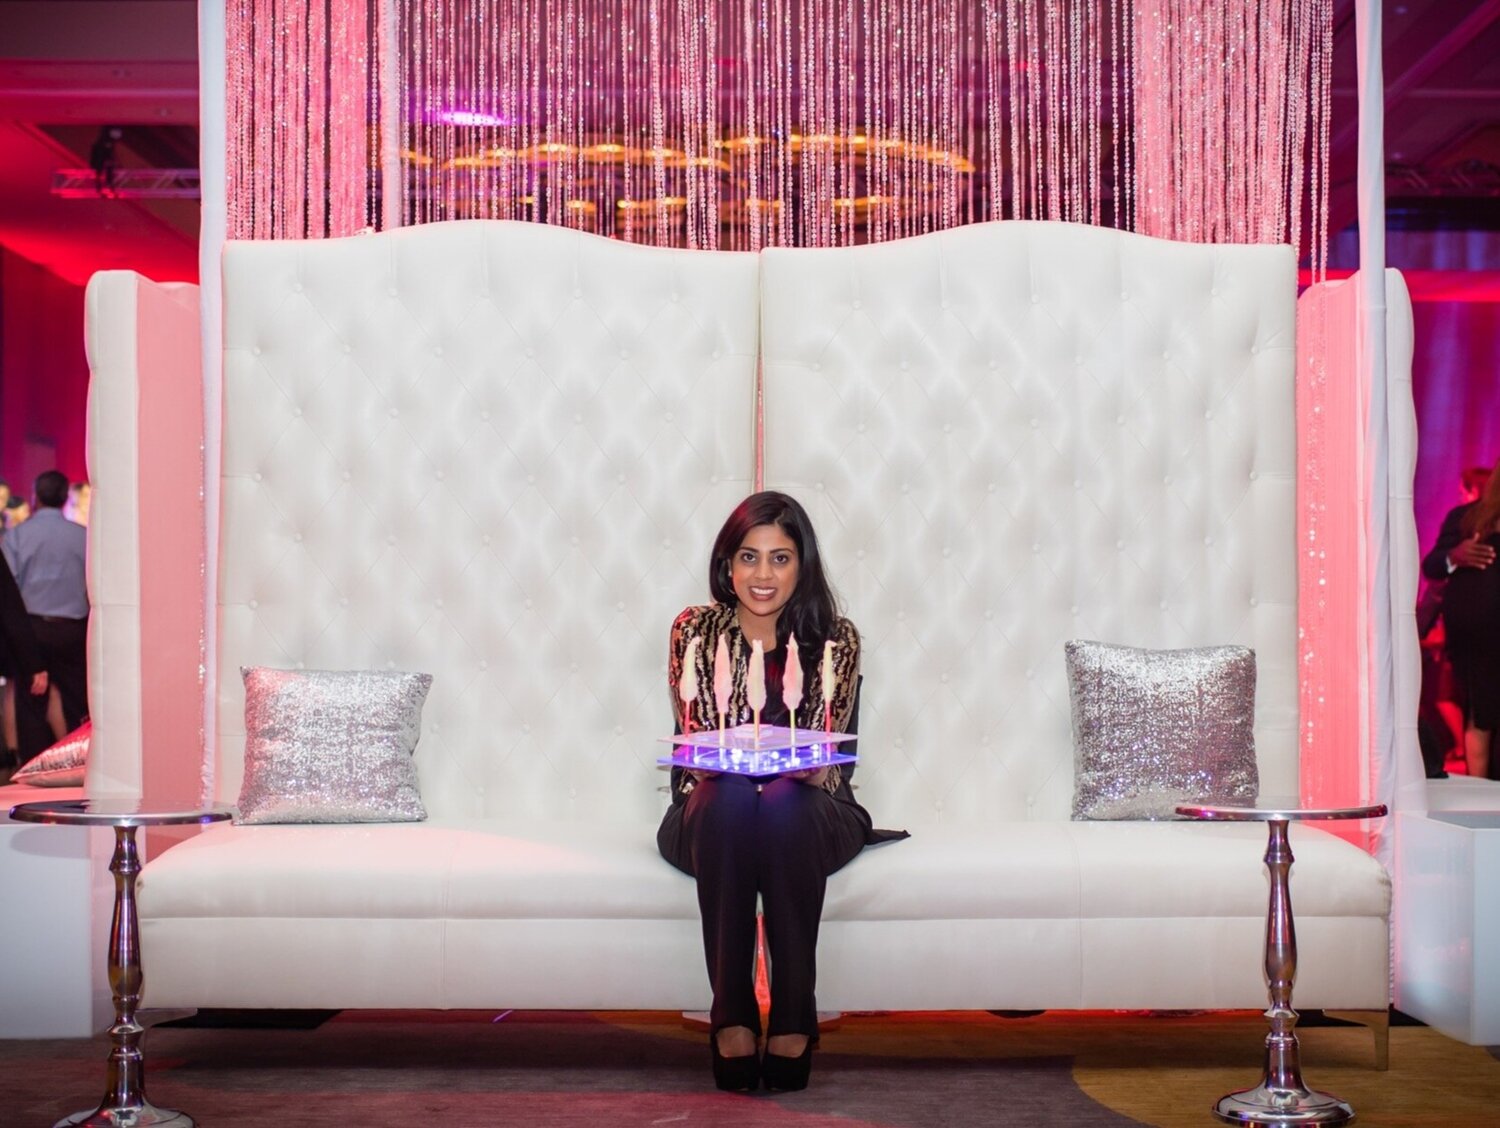 Yasmeen Tadia, creator of the Fluffpop, knows that to be life of the party you have bring Fluffpops!